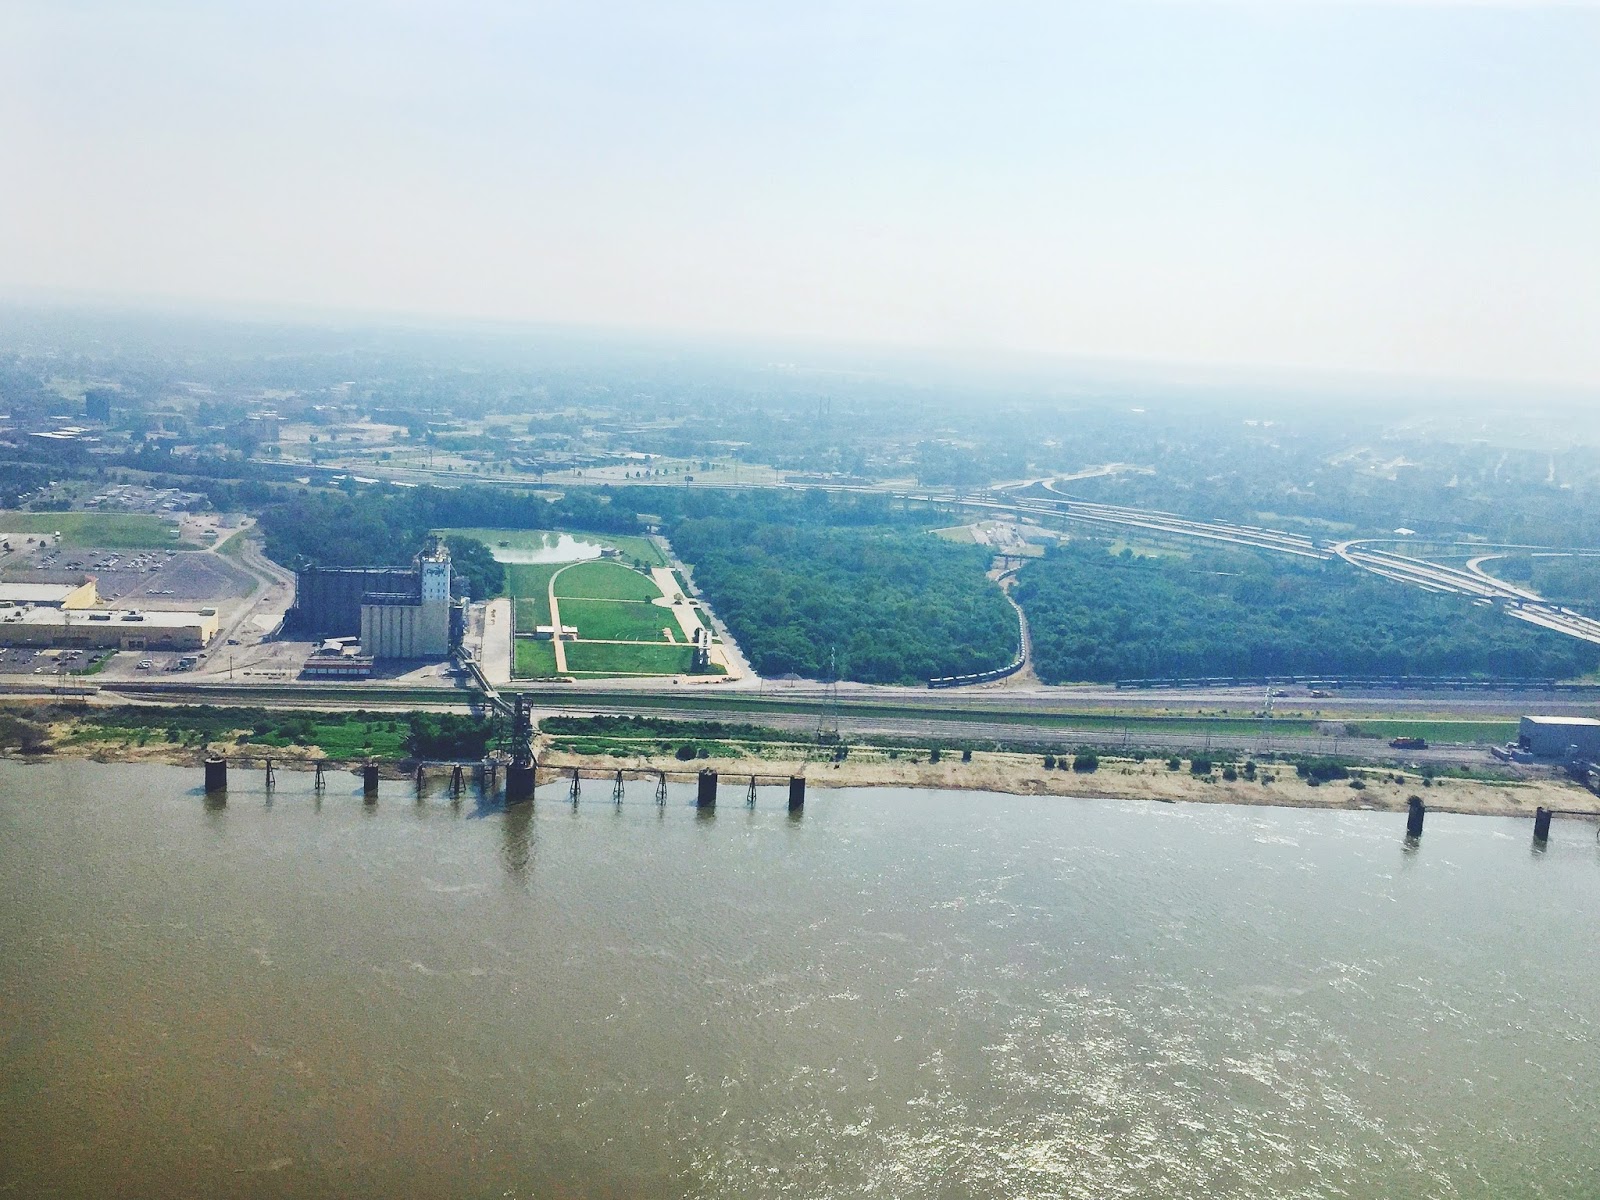 View of East St. Louis and the Mississippi